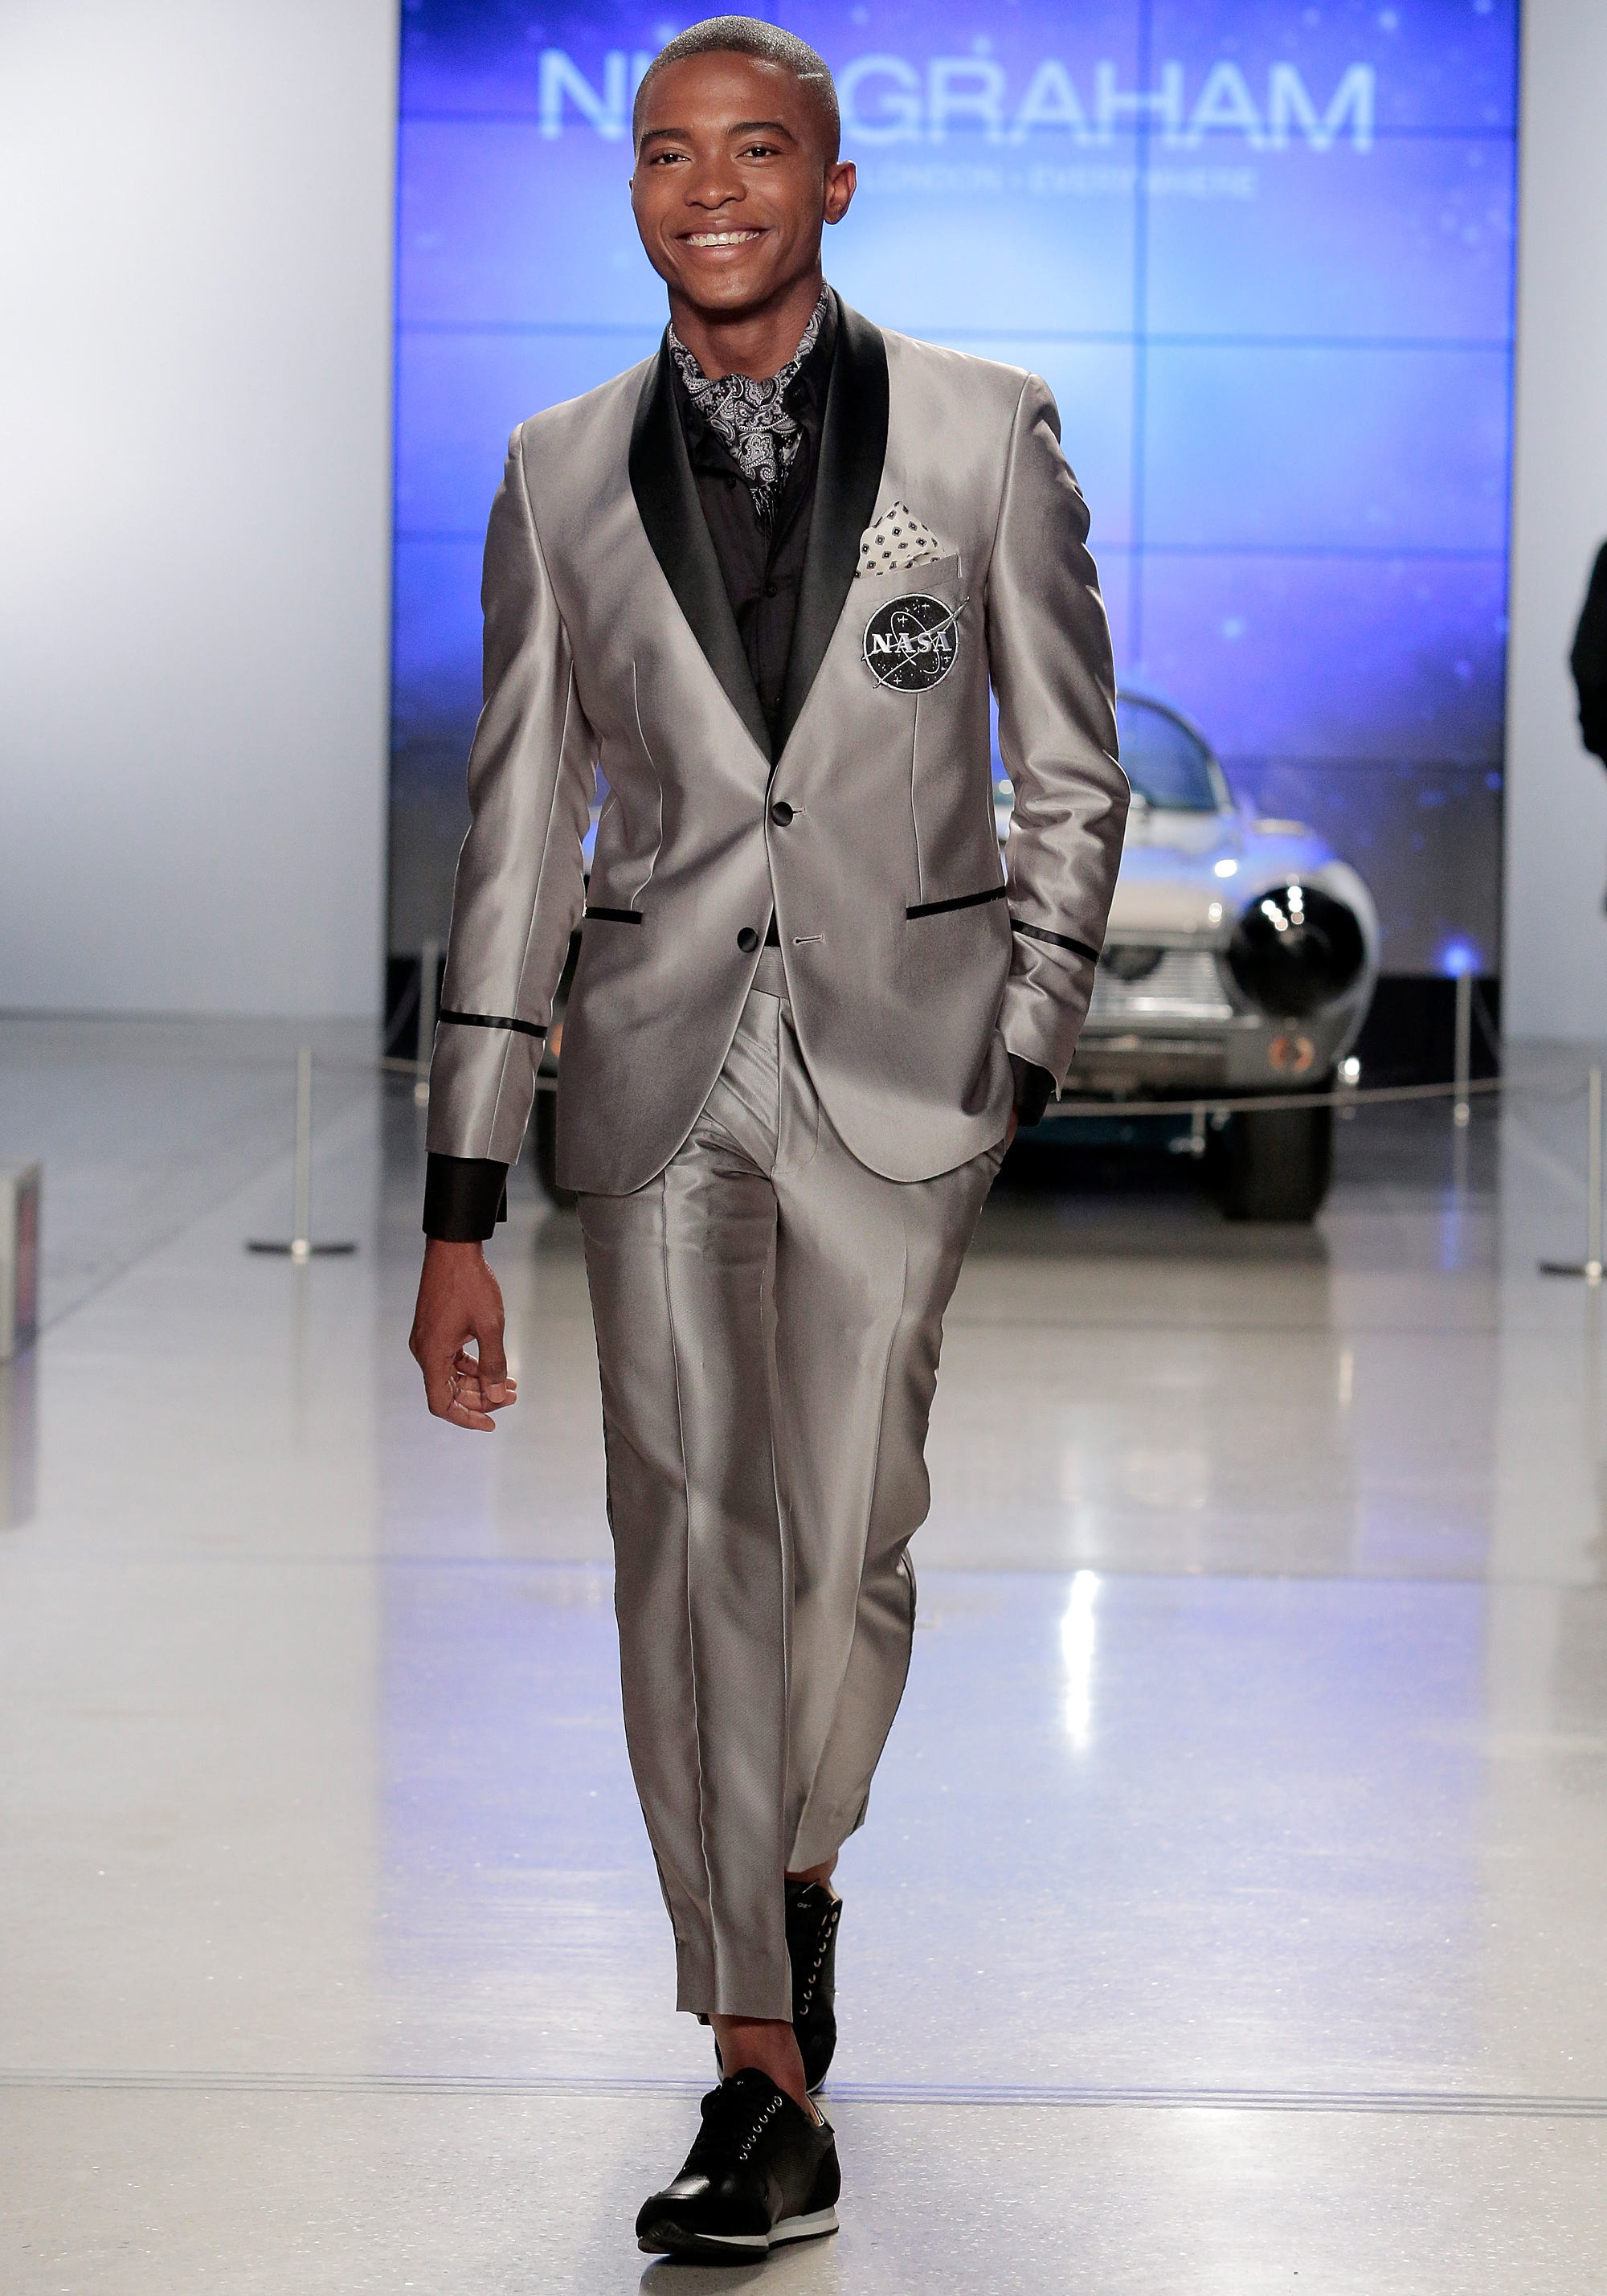 Image of model Igee Okafor wearing Florsheim Shoes on the runway of the Nick Graham Fashion Show during New York Fashion Week.